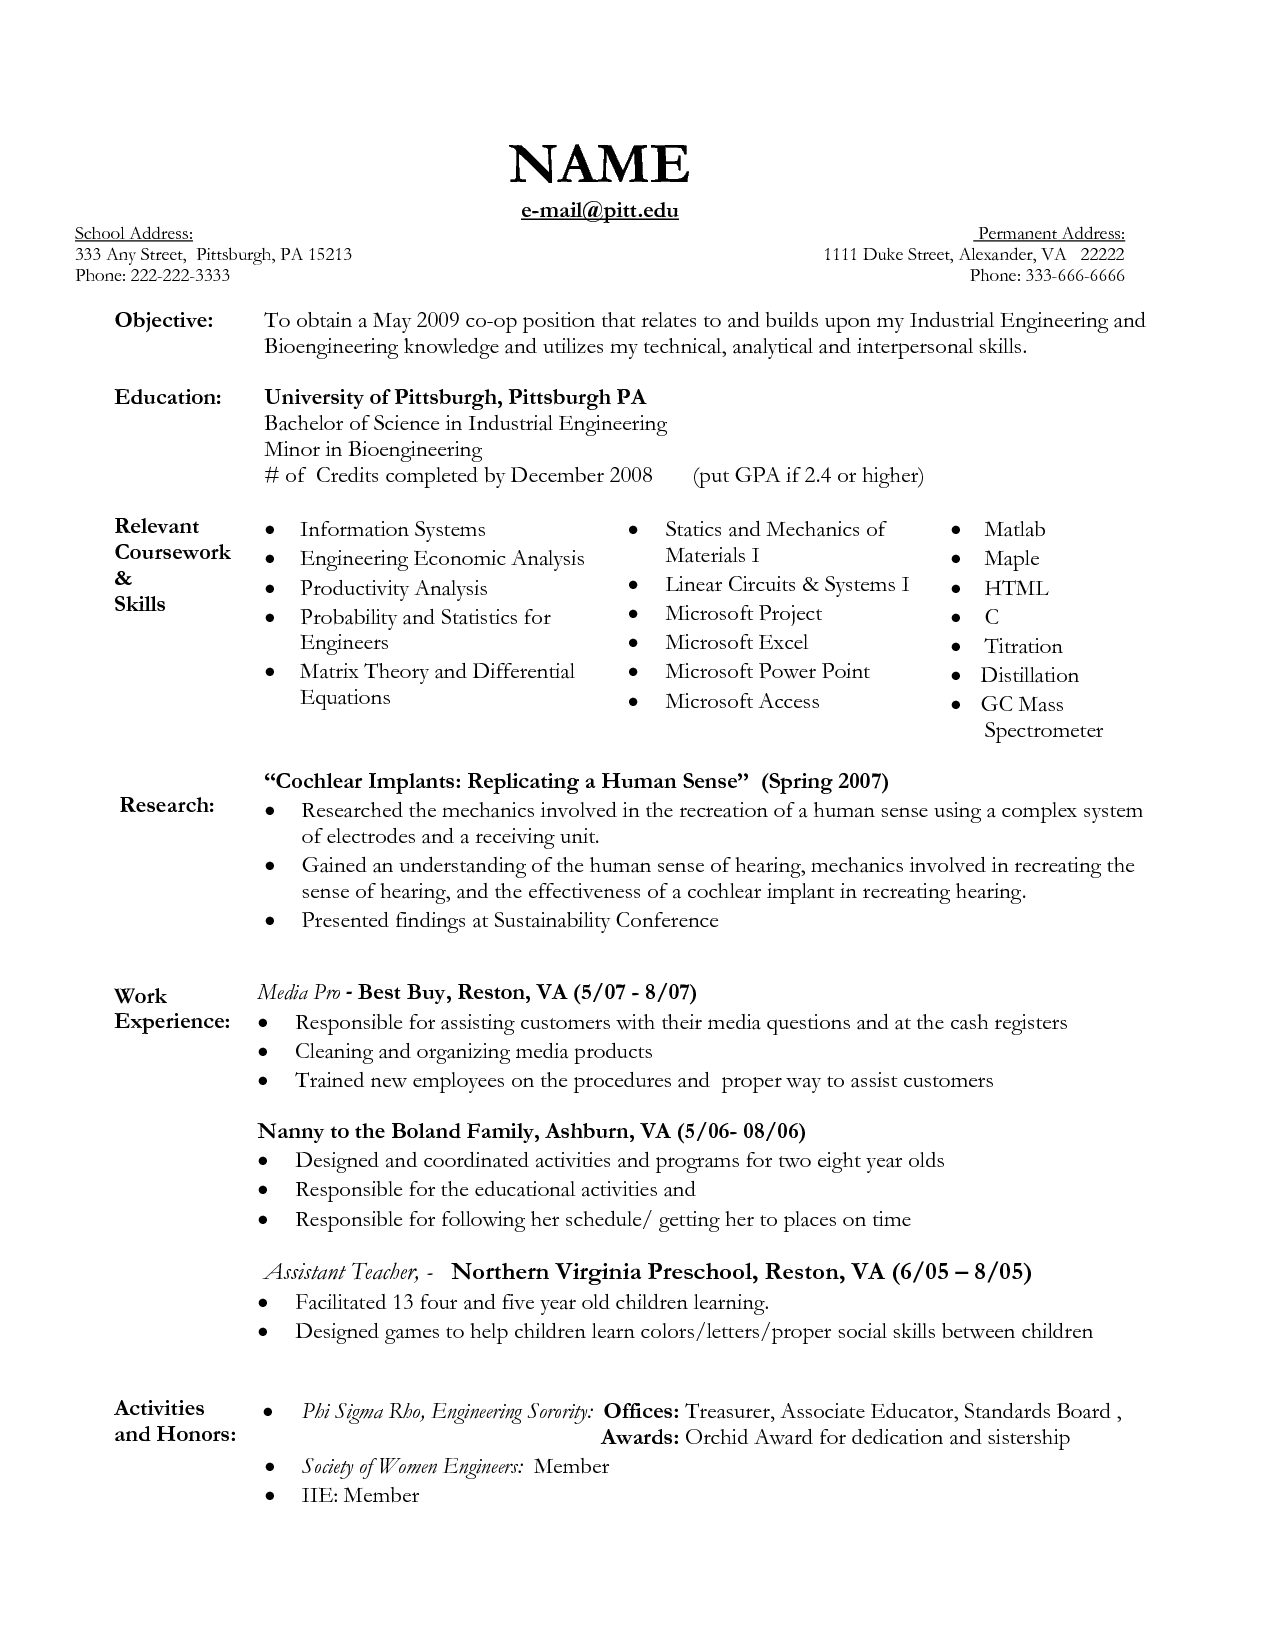 A Nanny Resume Examples 